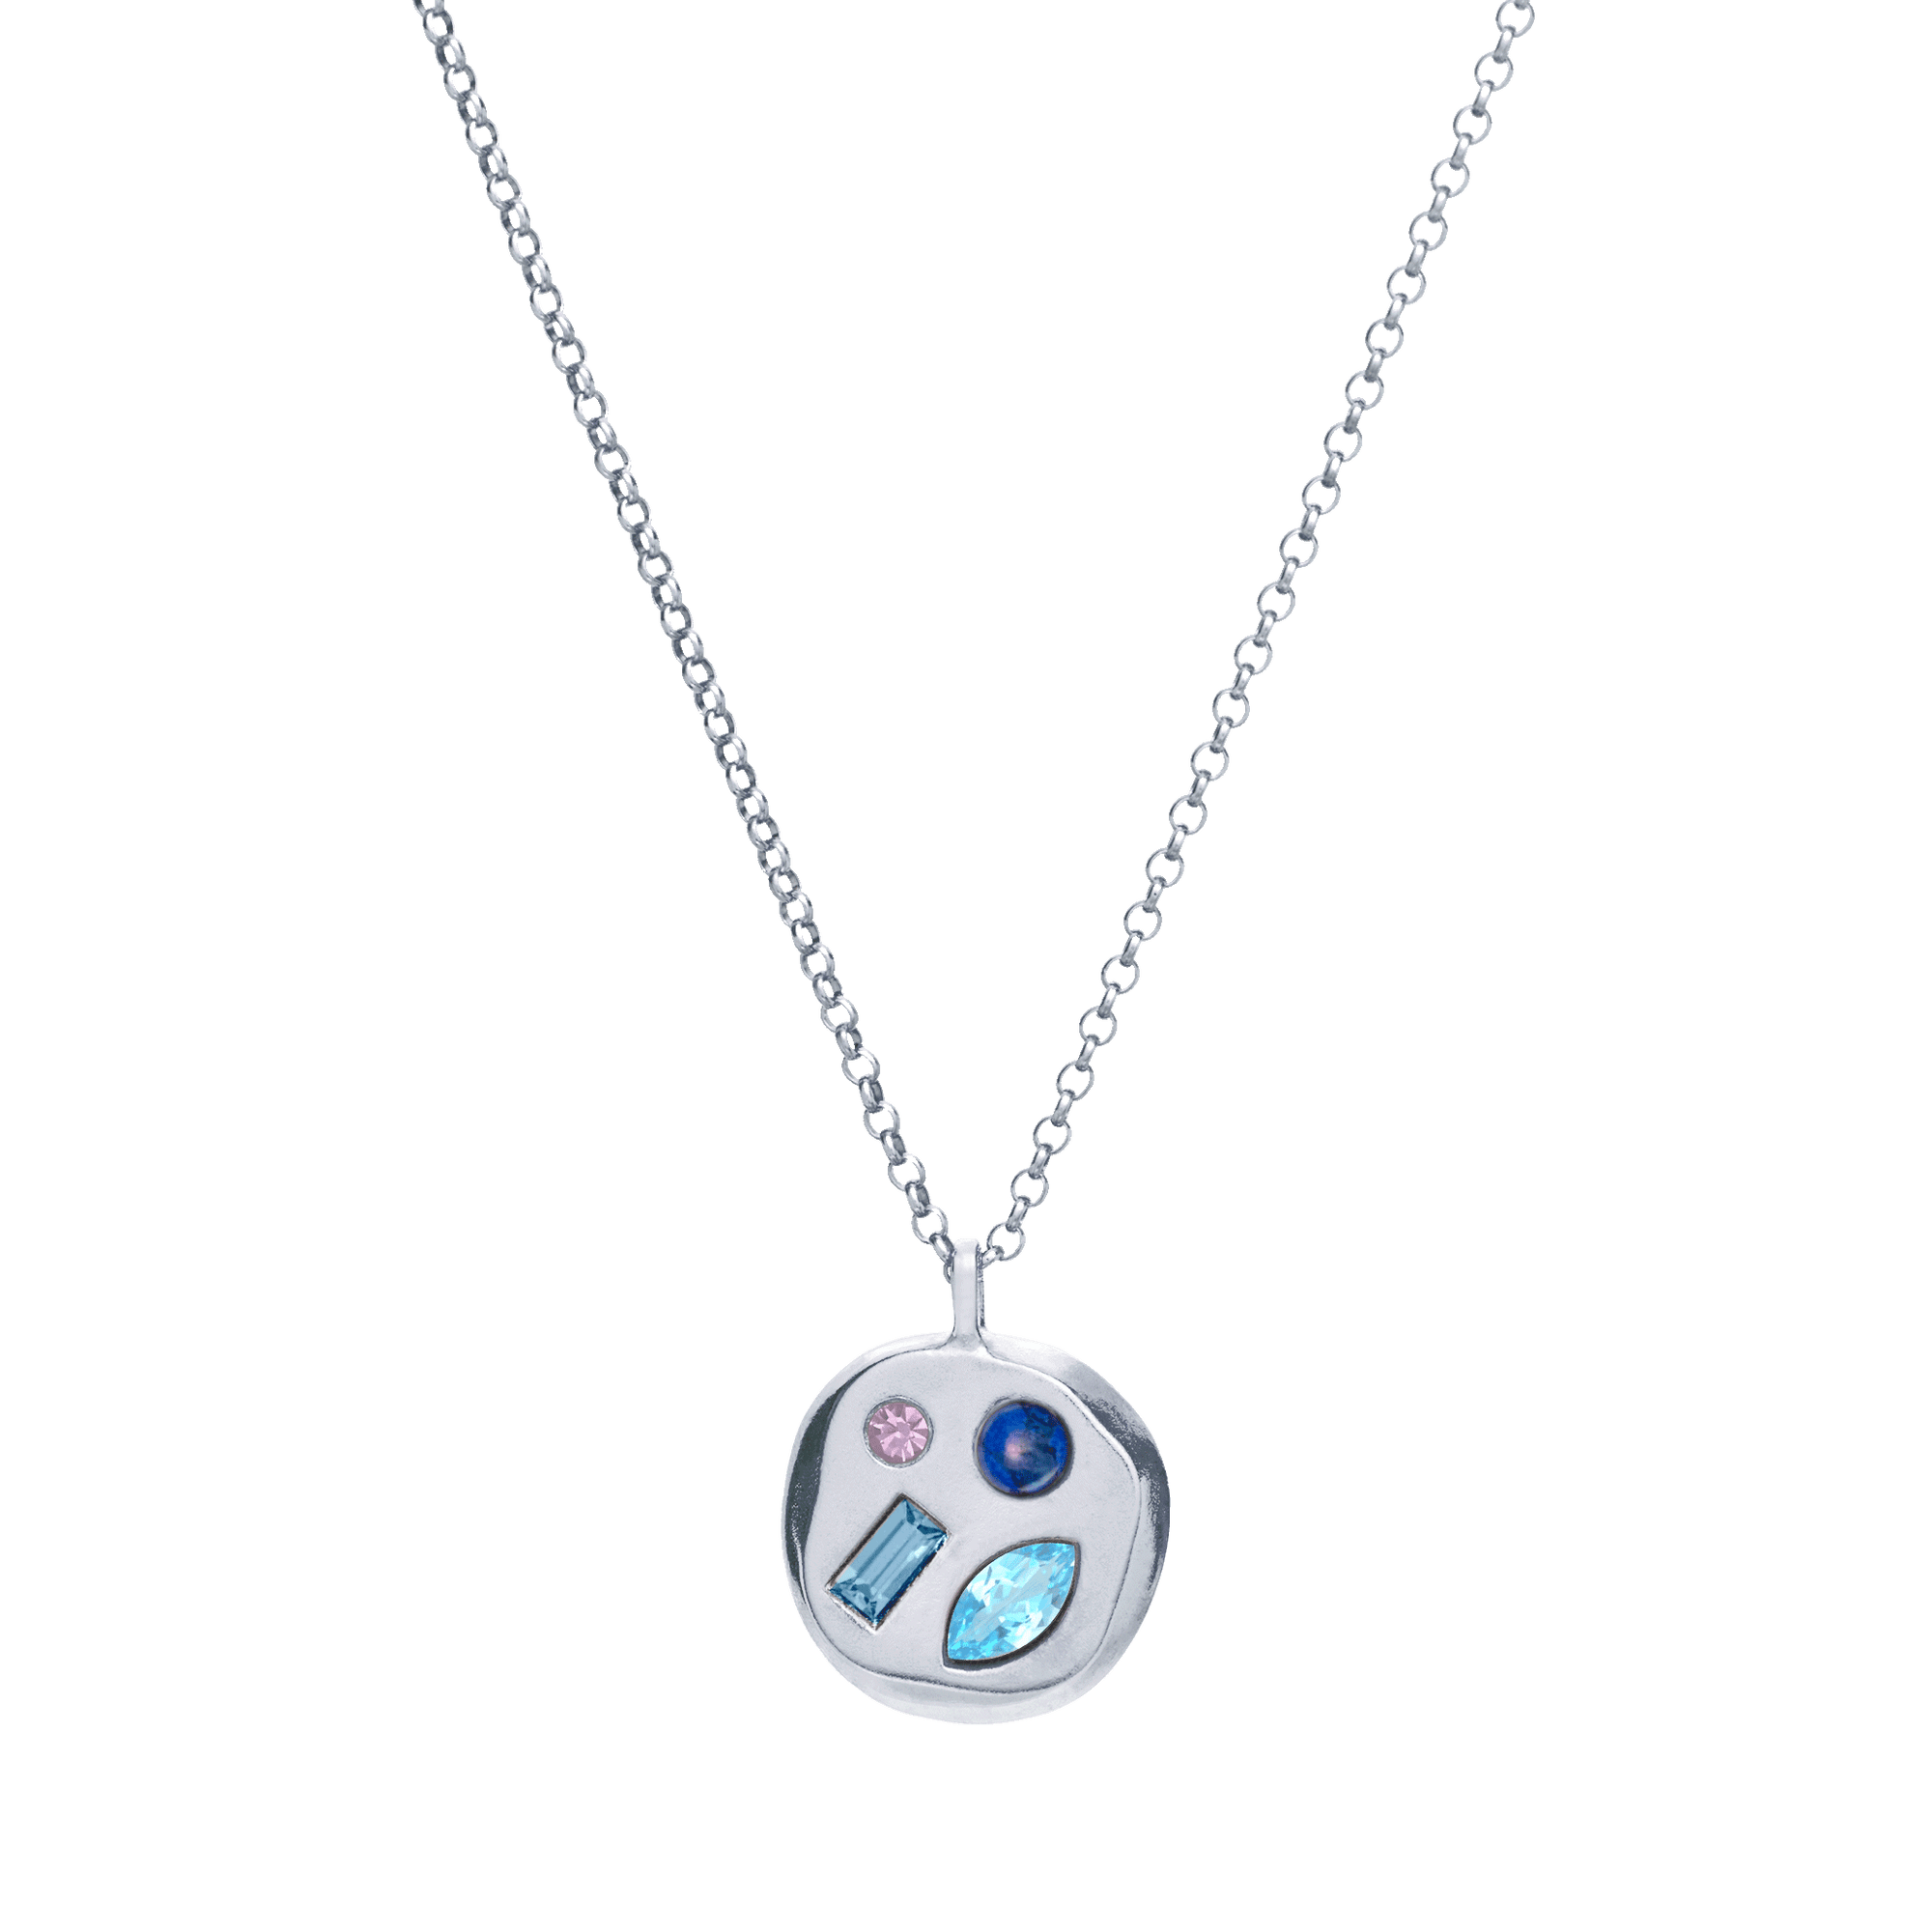 The December Seventeenth Pendant in Sterling Silver